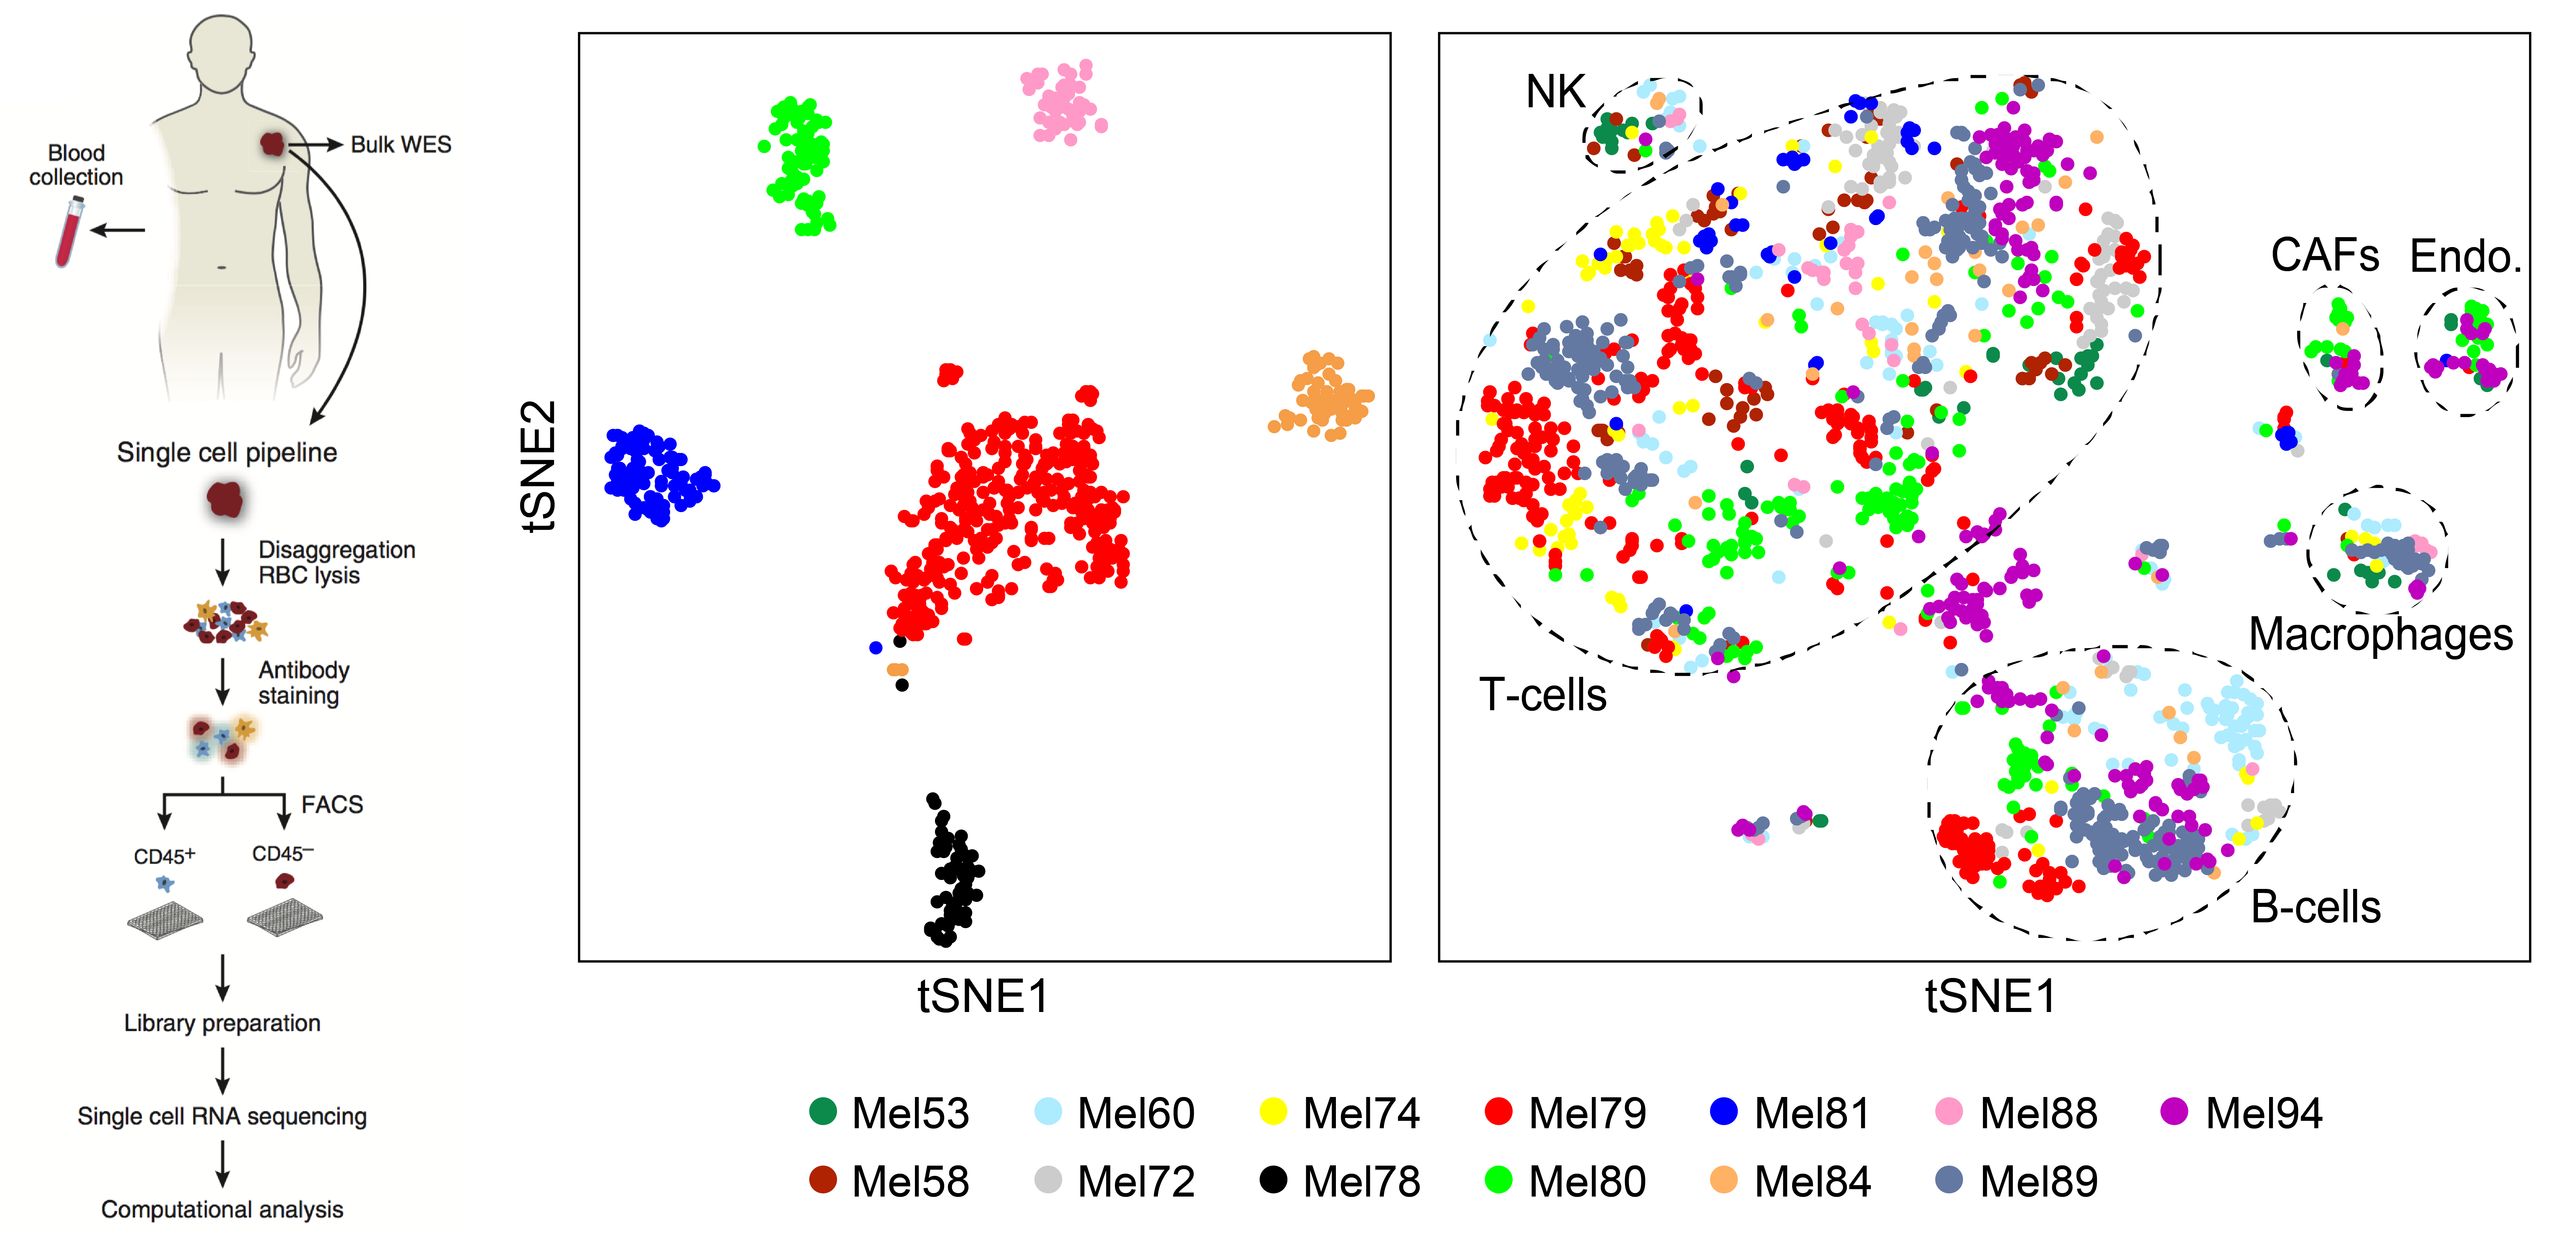 We have developed a clinical scRNA-seq pipeline to profile cells from primary and metastatic tumor biopsies. (Tirosh et al., Science, 2016).